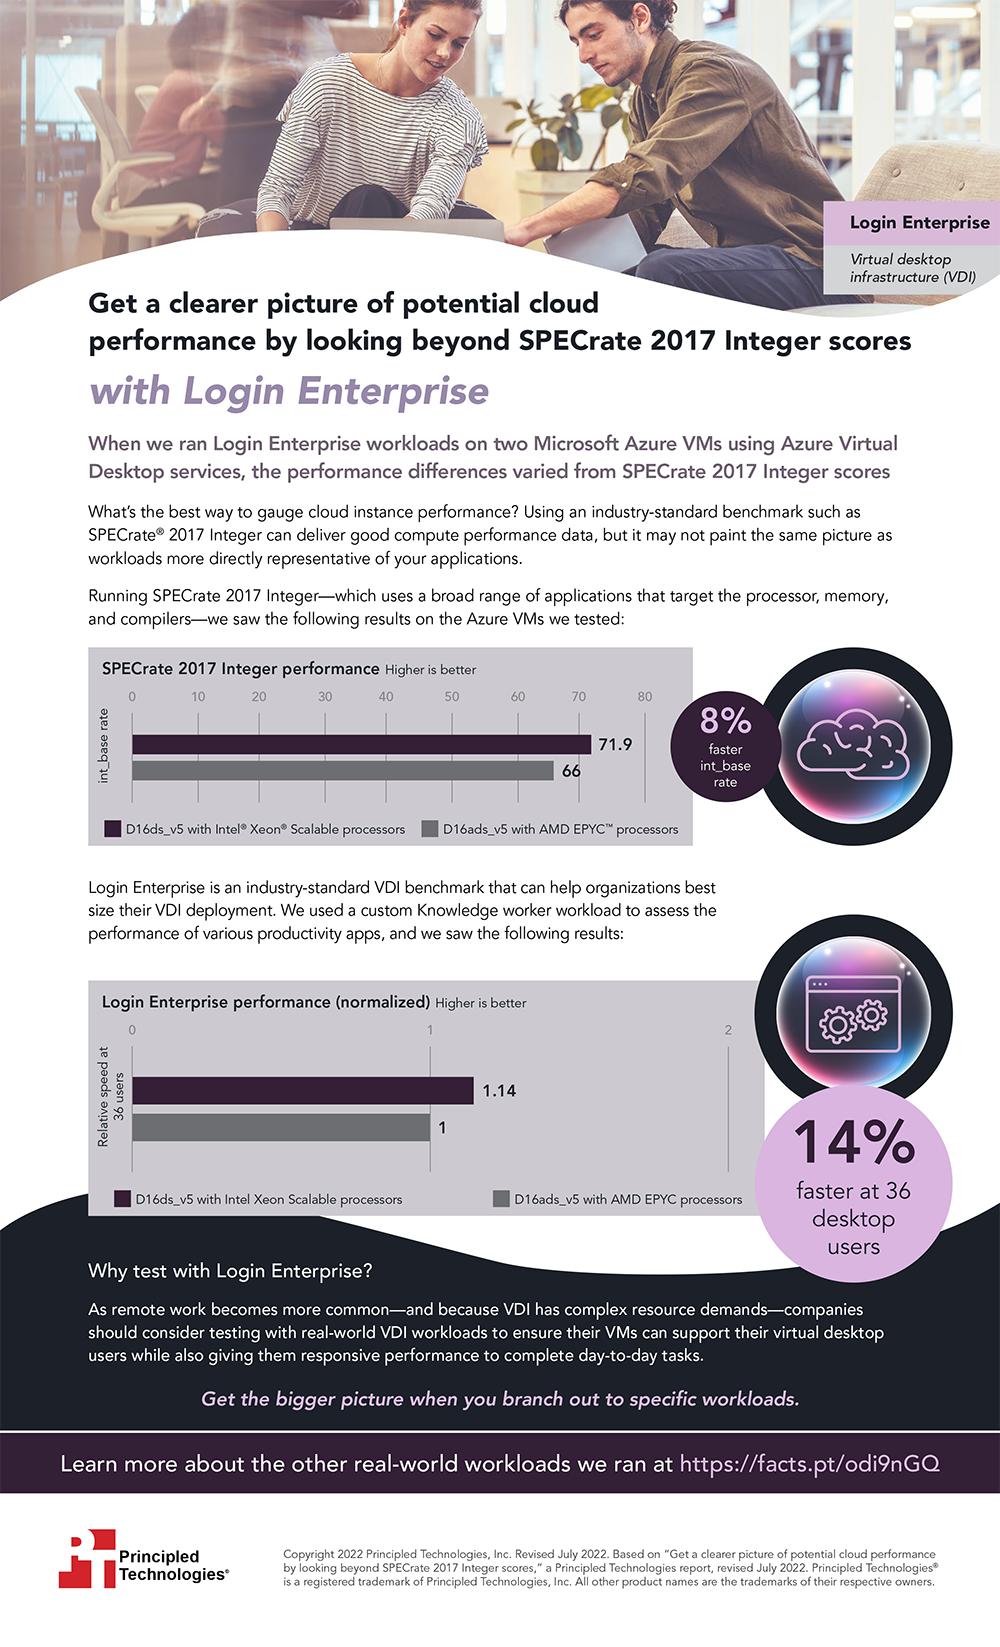 Get a clearer picture of potential cloud performance by looking beyond SPECrate 2017 Integer scores with Login Enterprise - Infographic